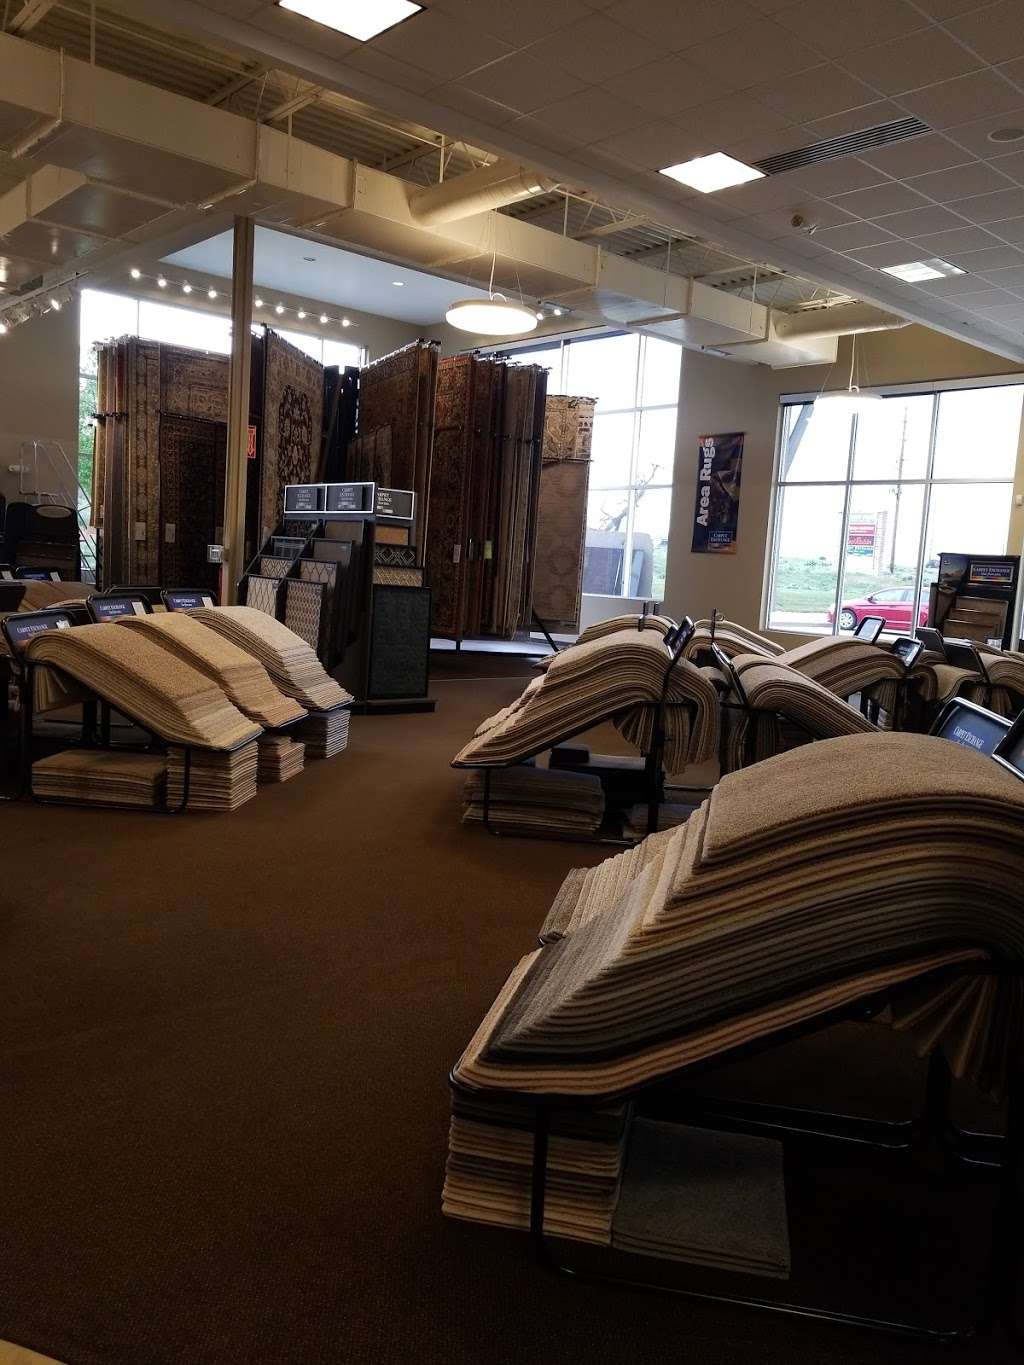 Carpet Exchange | 4524 Centerplace Dr, Greeley, CO 80634, USA | Phone: (970) 313-1250